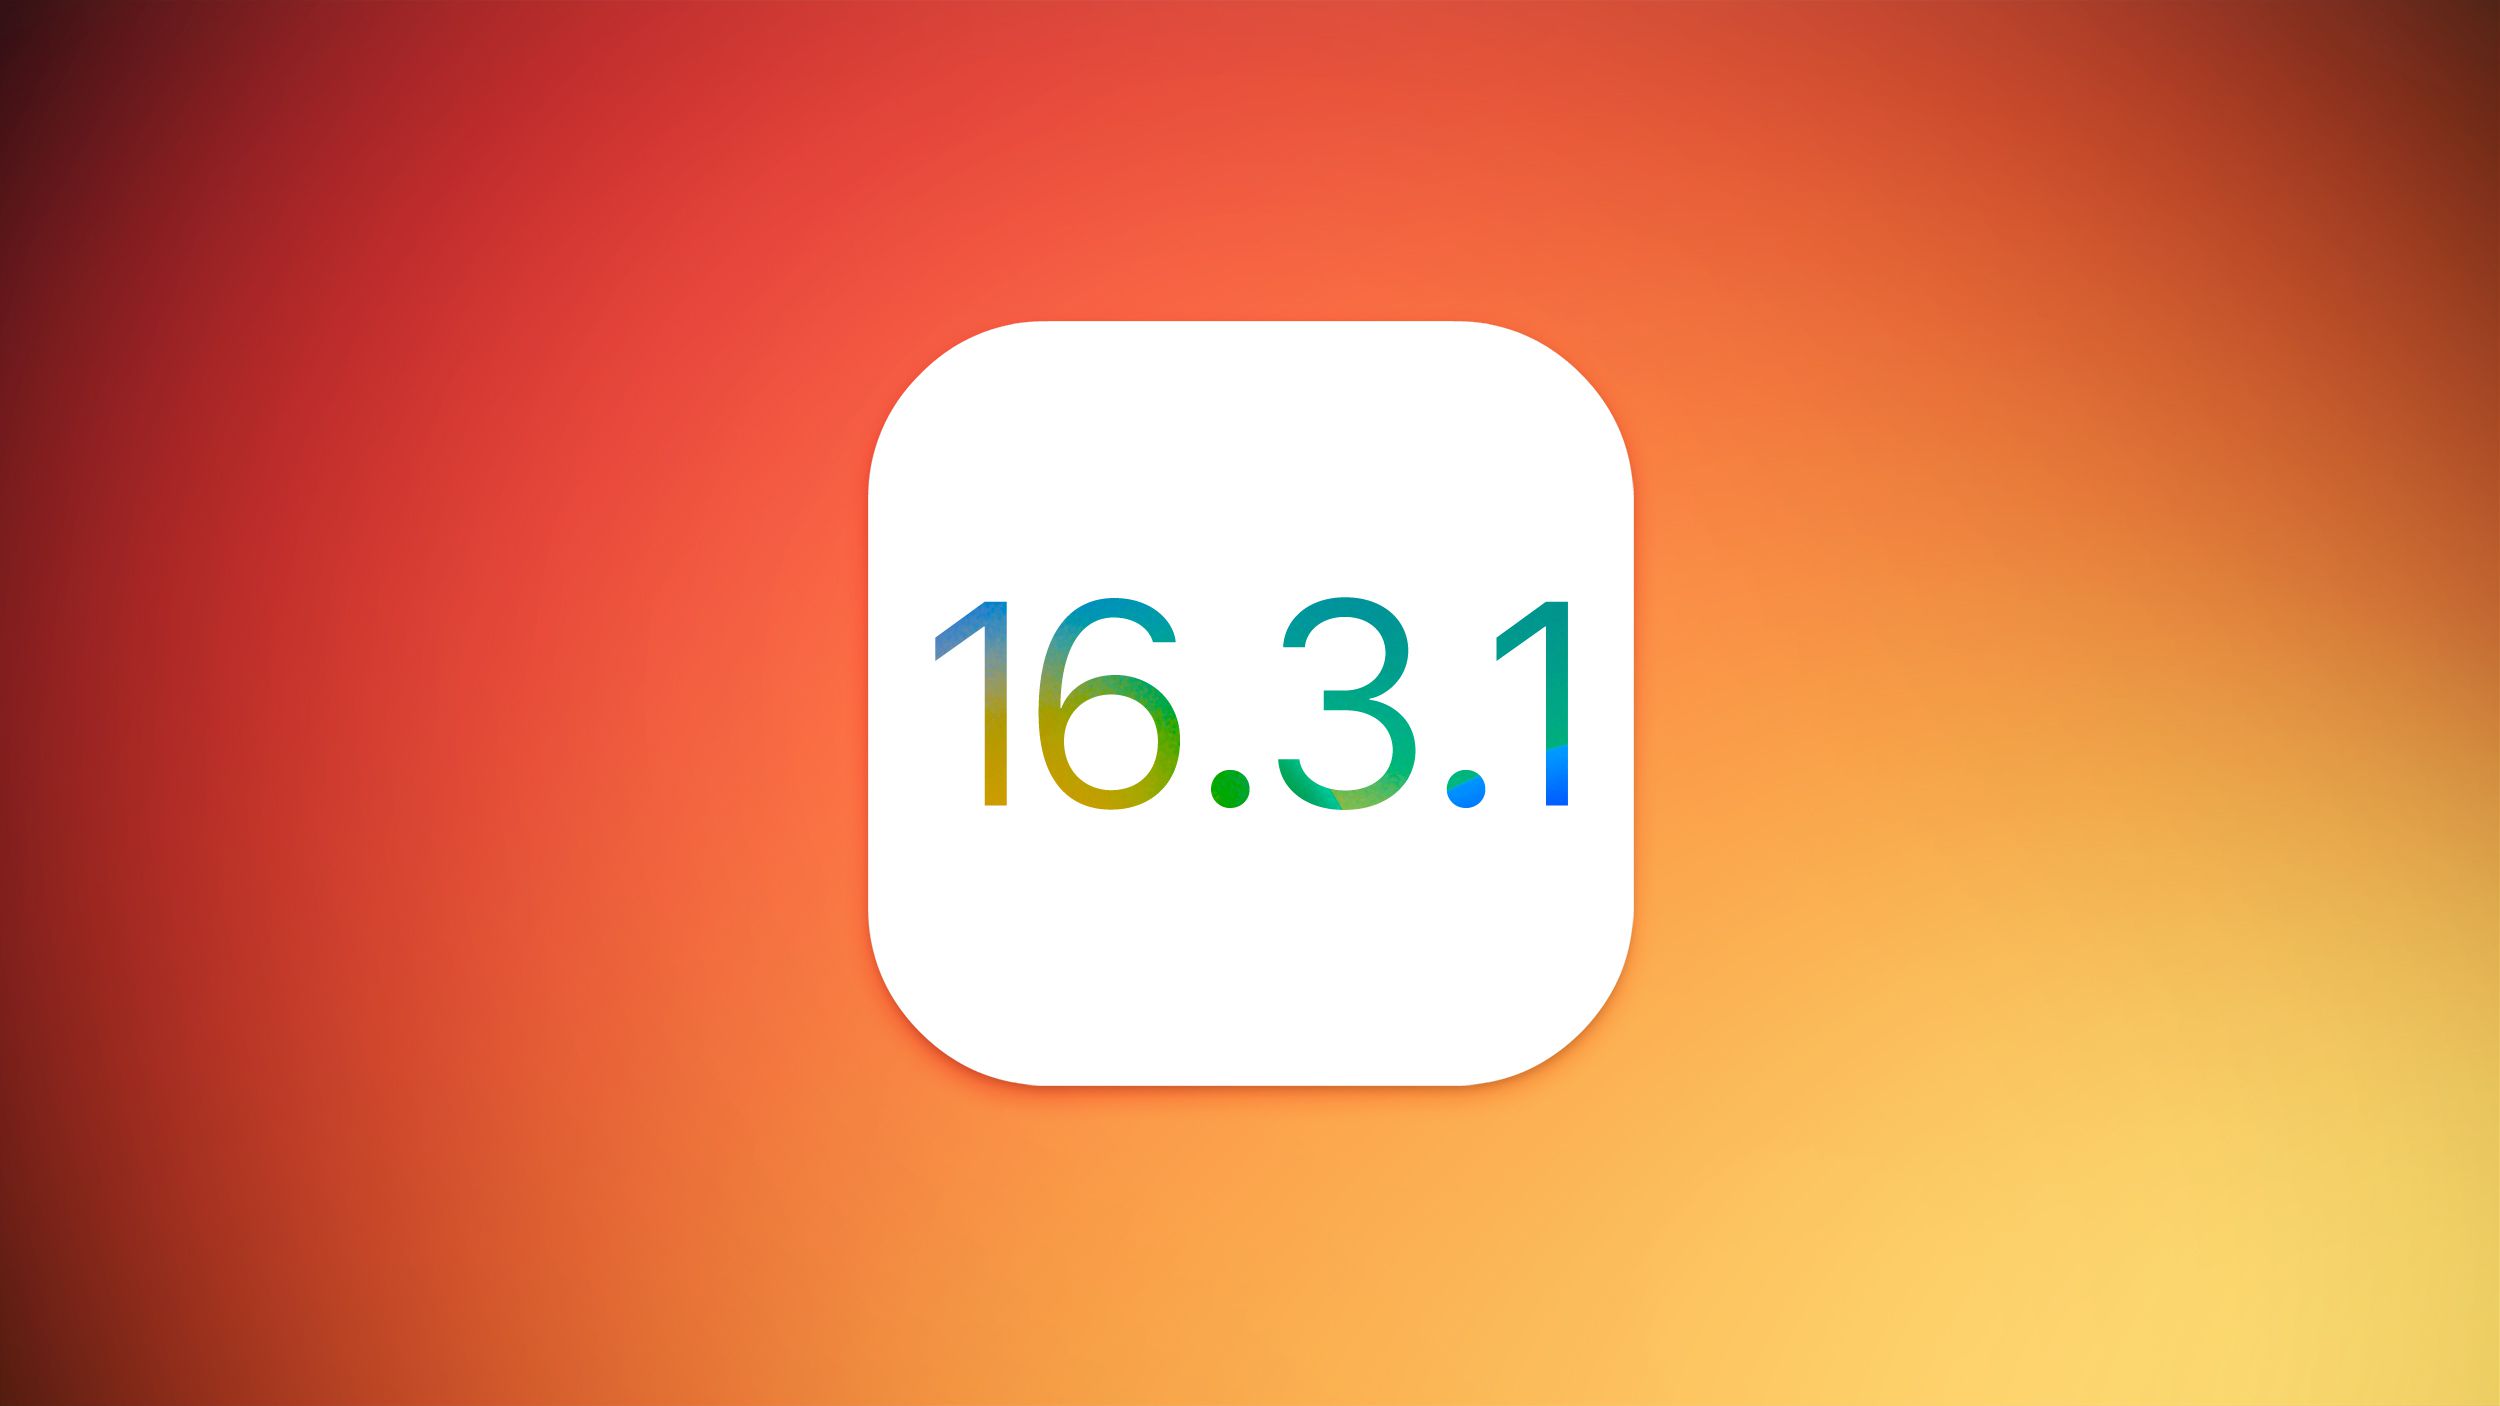 iOS Beta Updates Continue Testing: How to Get an Early Look at New Features? 17